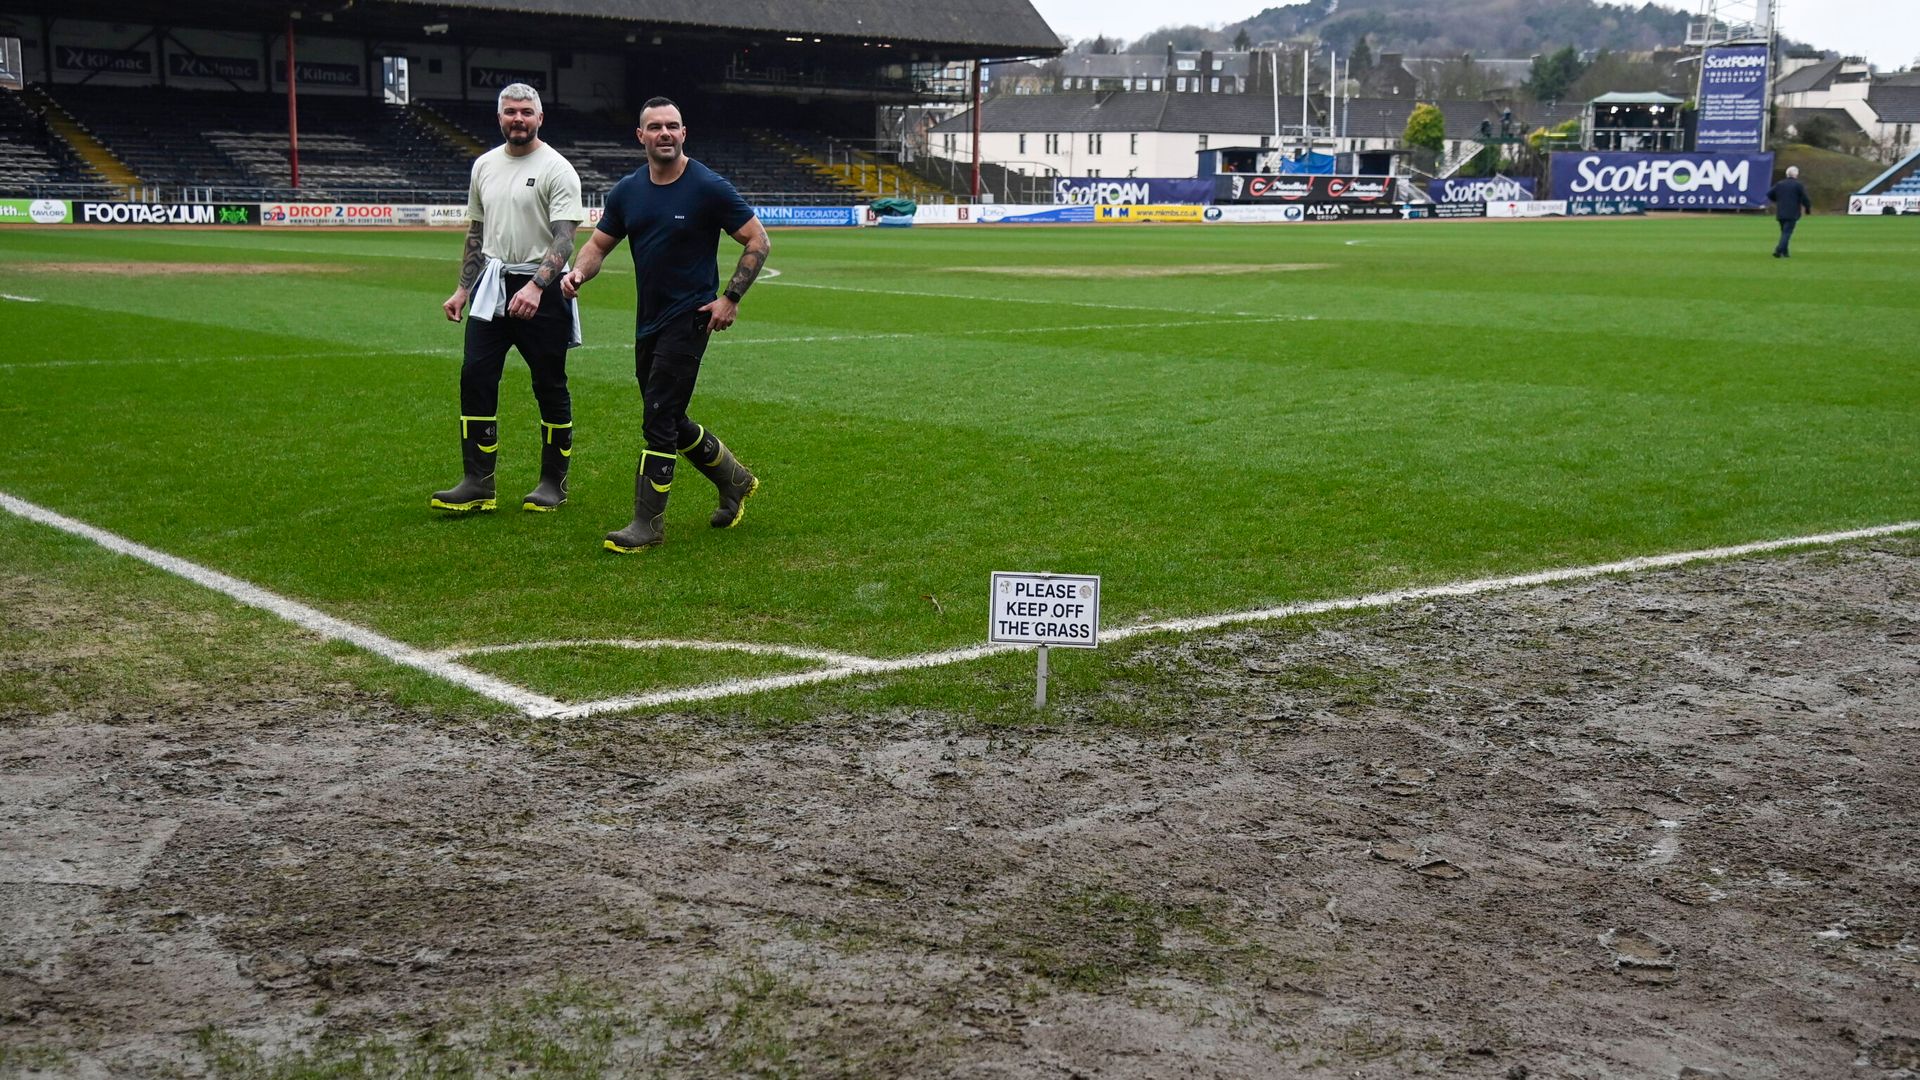 Dundee vs Rangers called off after heavy rainfall